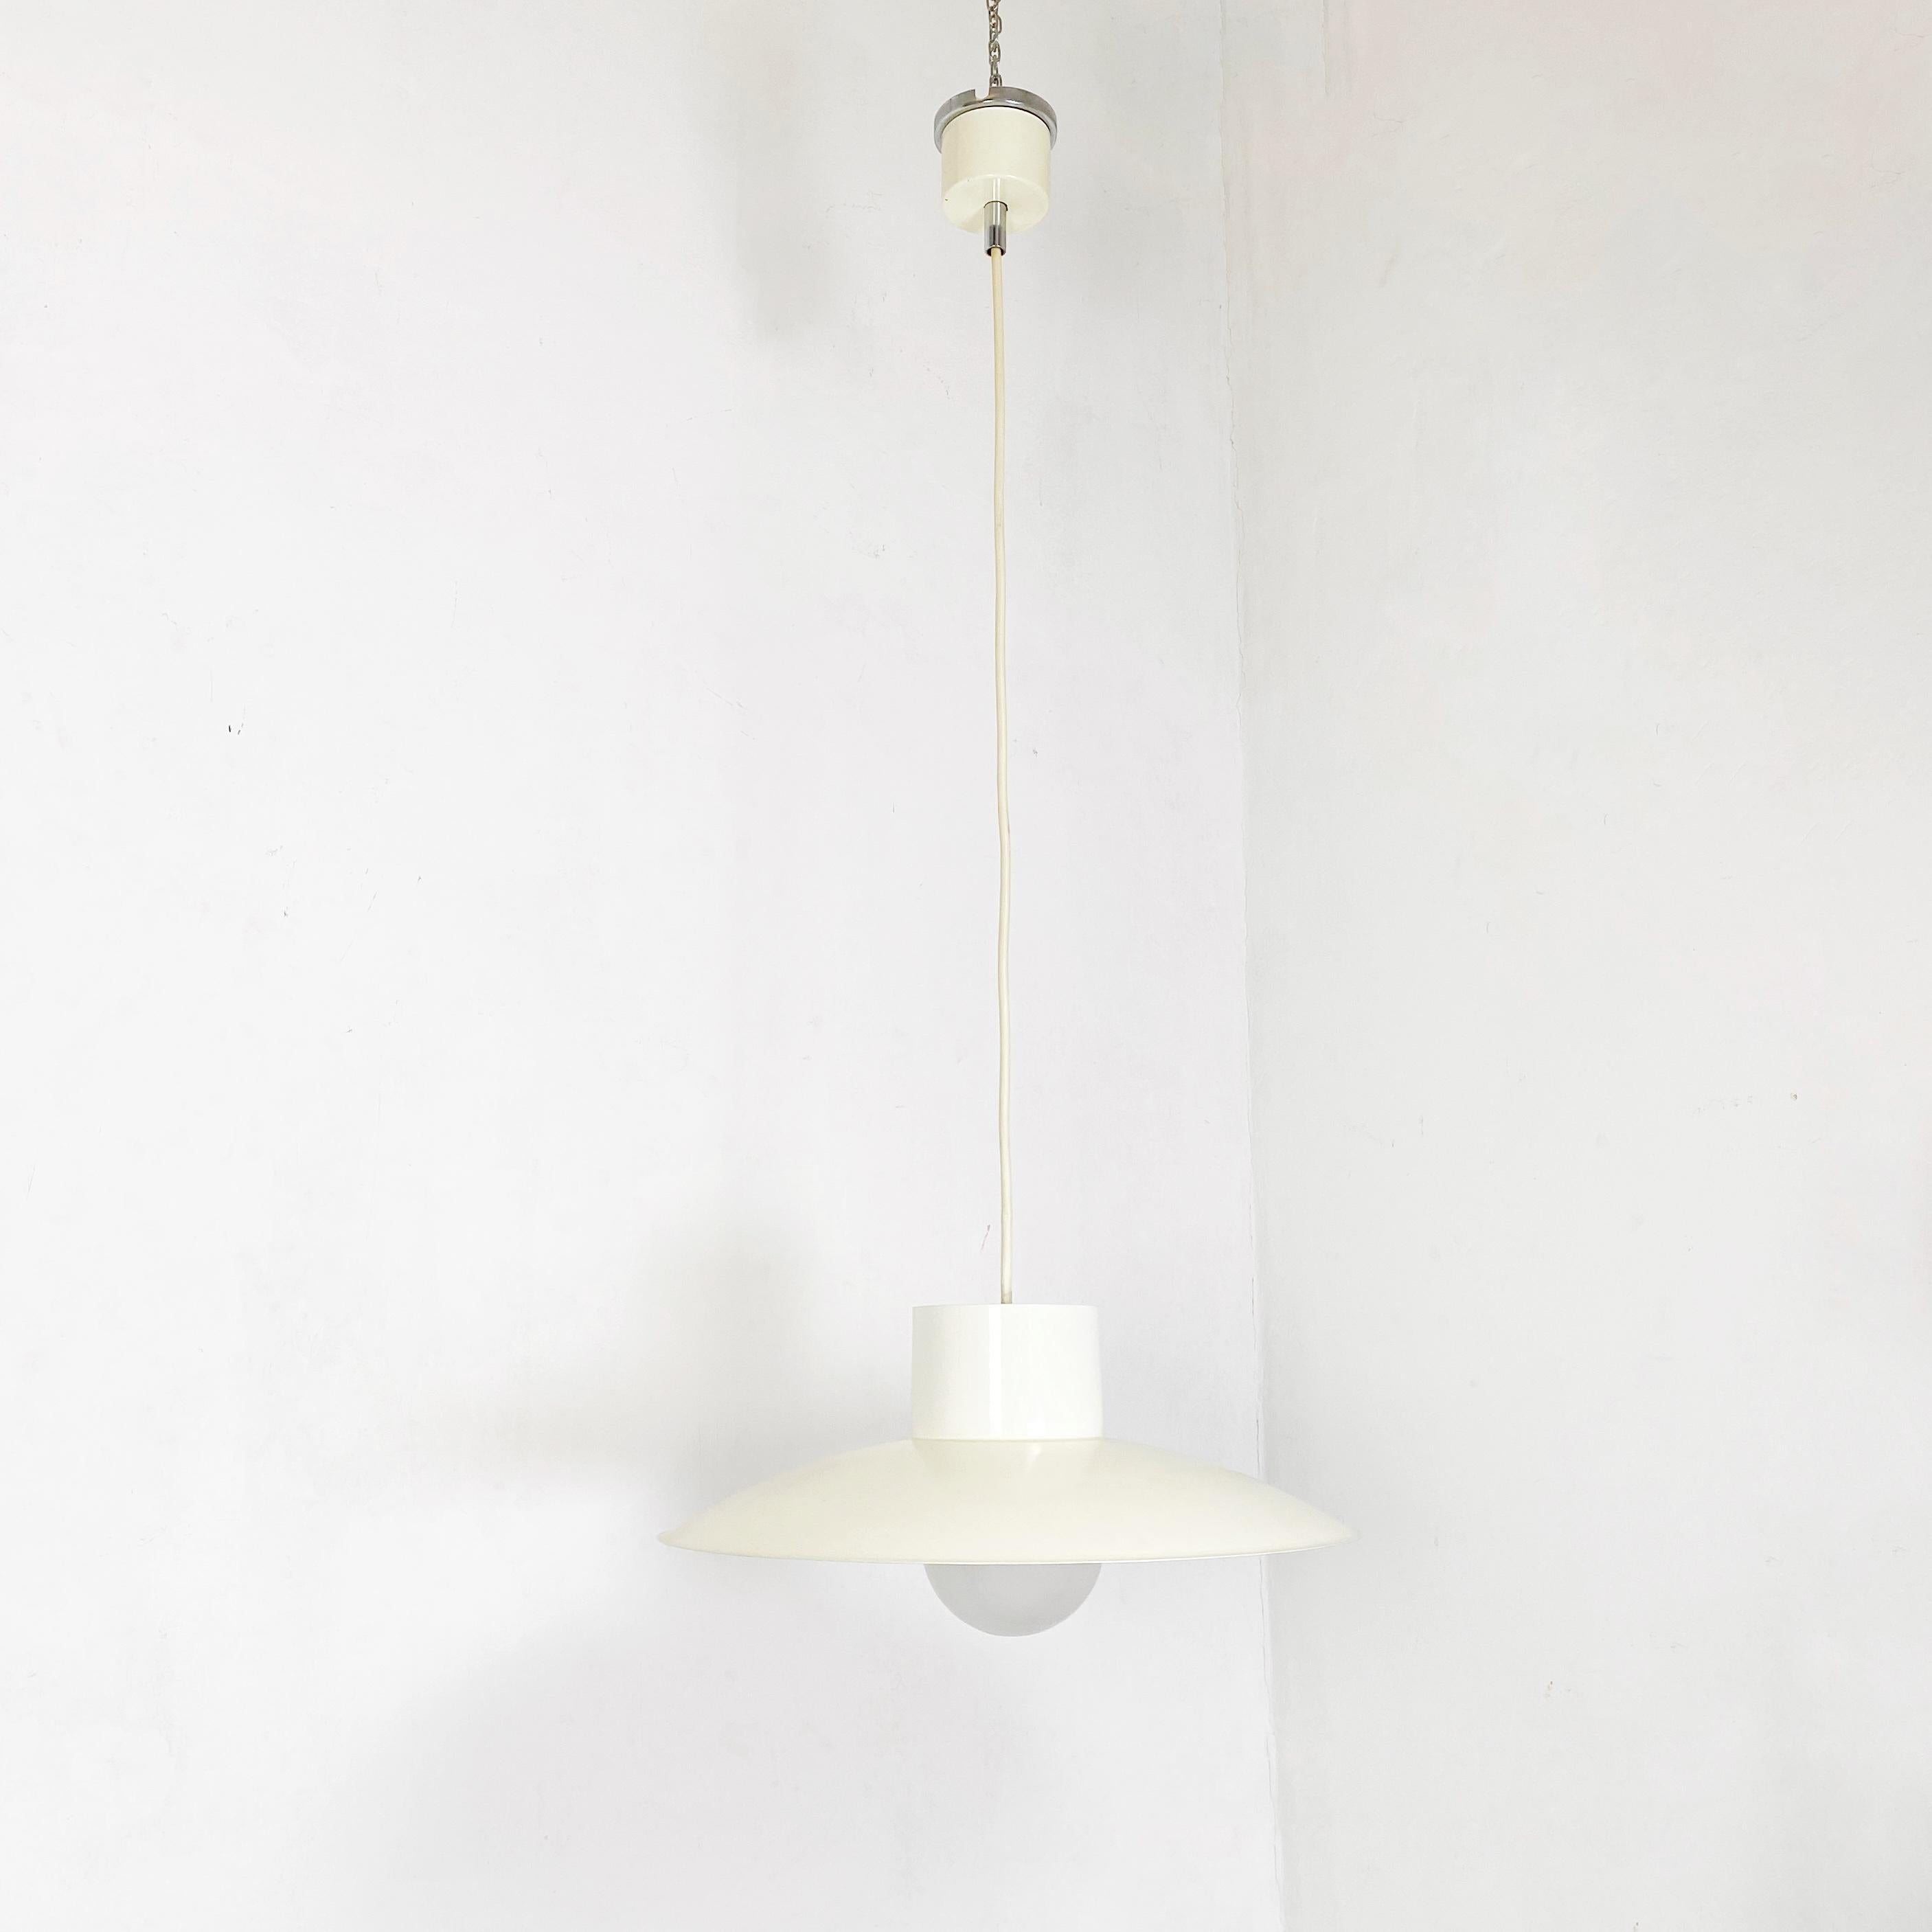 Italian Mid-Century Modern metal chandelier by Franco Mirenzi for Sirrah, 1970s
White enamelled metal chandelier with oplaine glass lampshade. Designed by Franco Mirenzi for Sirrah in the 1970s.

Good conditions.

Measures in cm 55 D x 125 H.